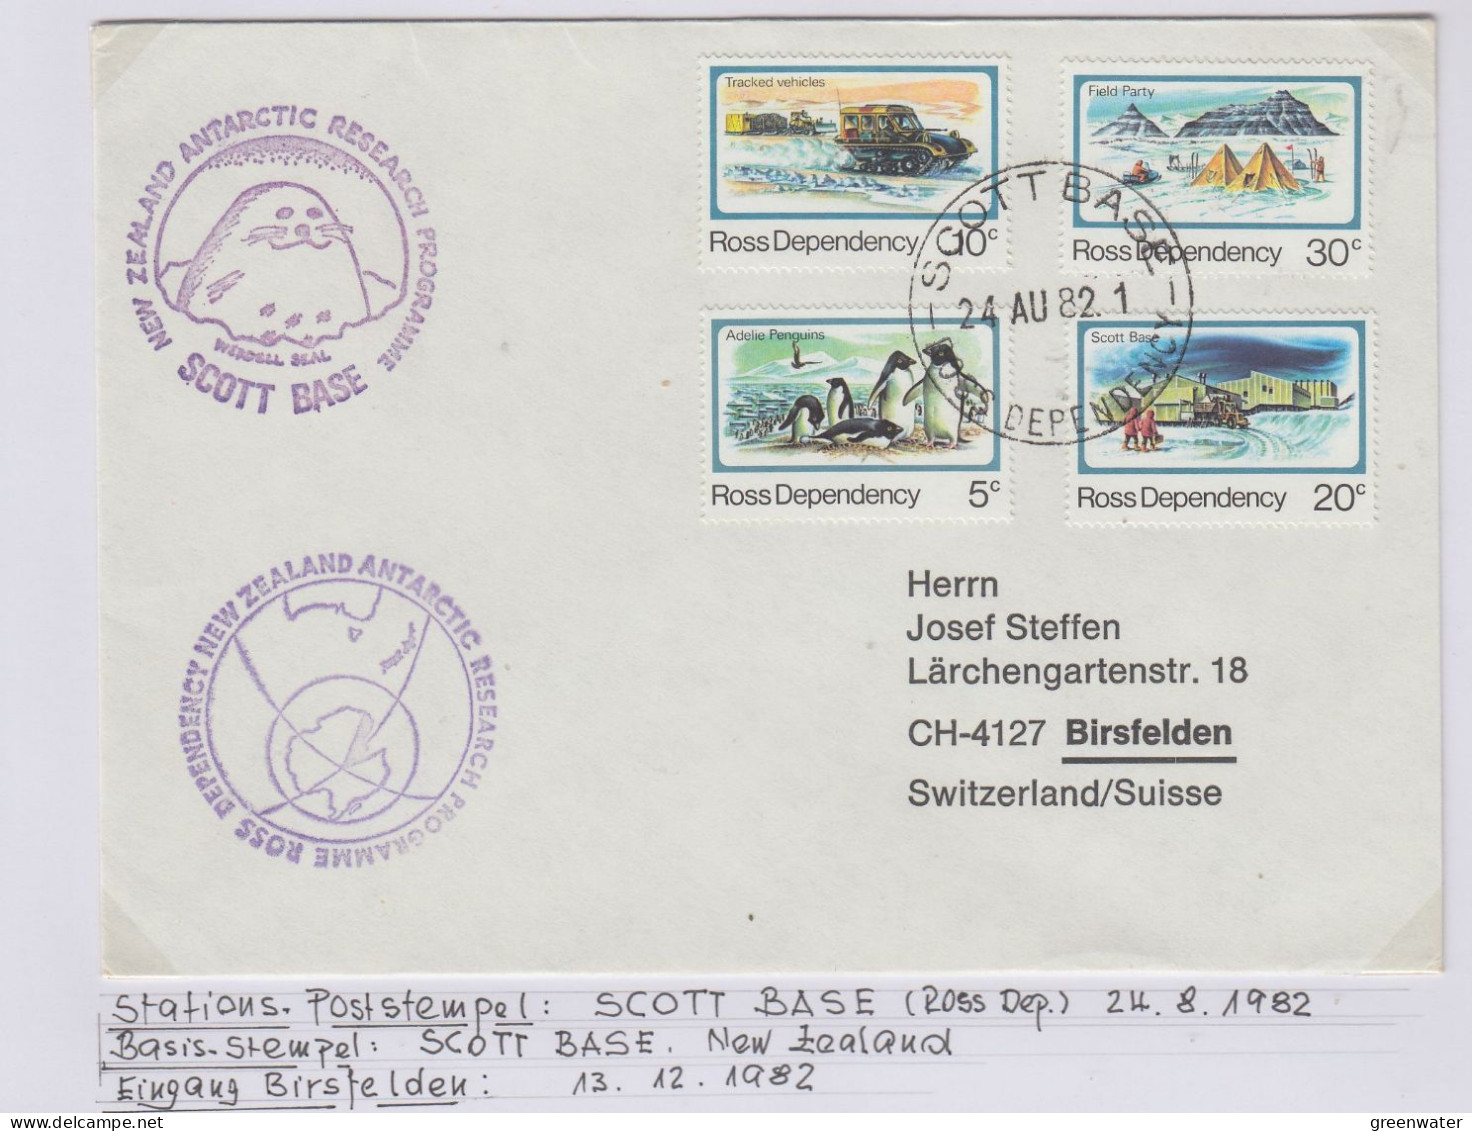 Ross Dependency Cover  NZ  Antarctic Research  Expedition Ca Scott Base 24 AUG 1982 (WB162) - Covers & Documents